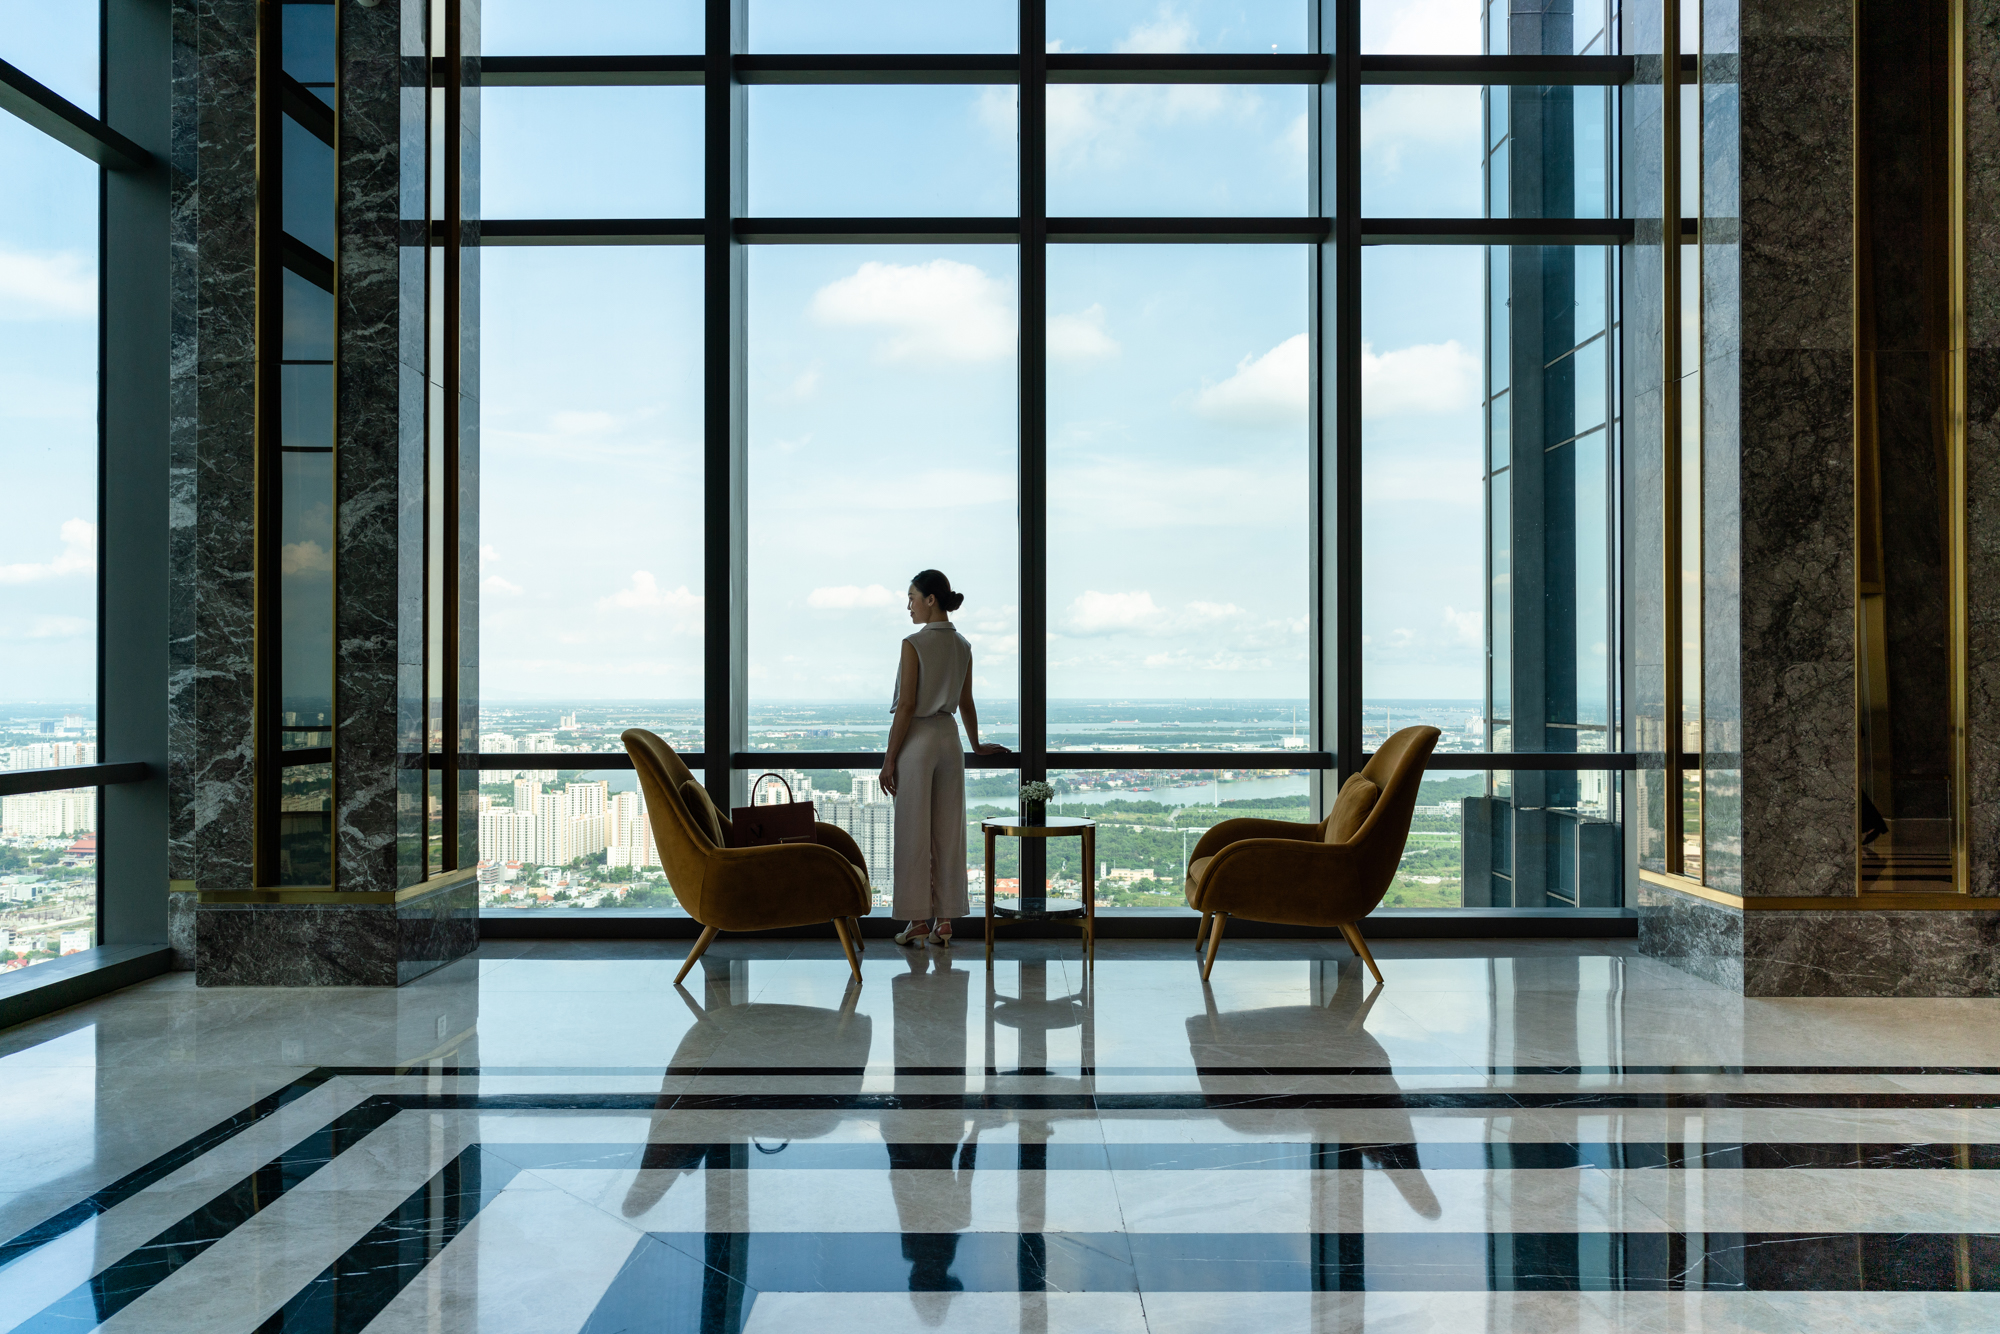 A woman takes in the views of Ho Chi Minh City from a high rise hotel